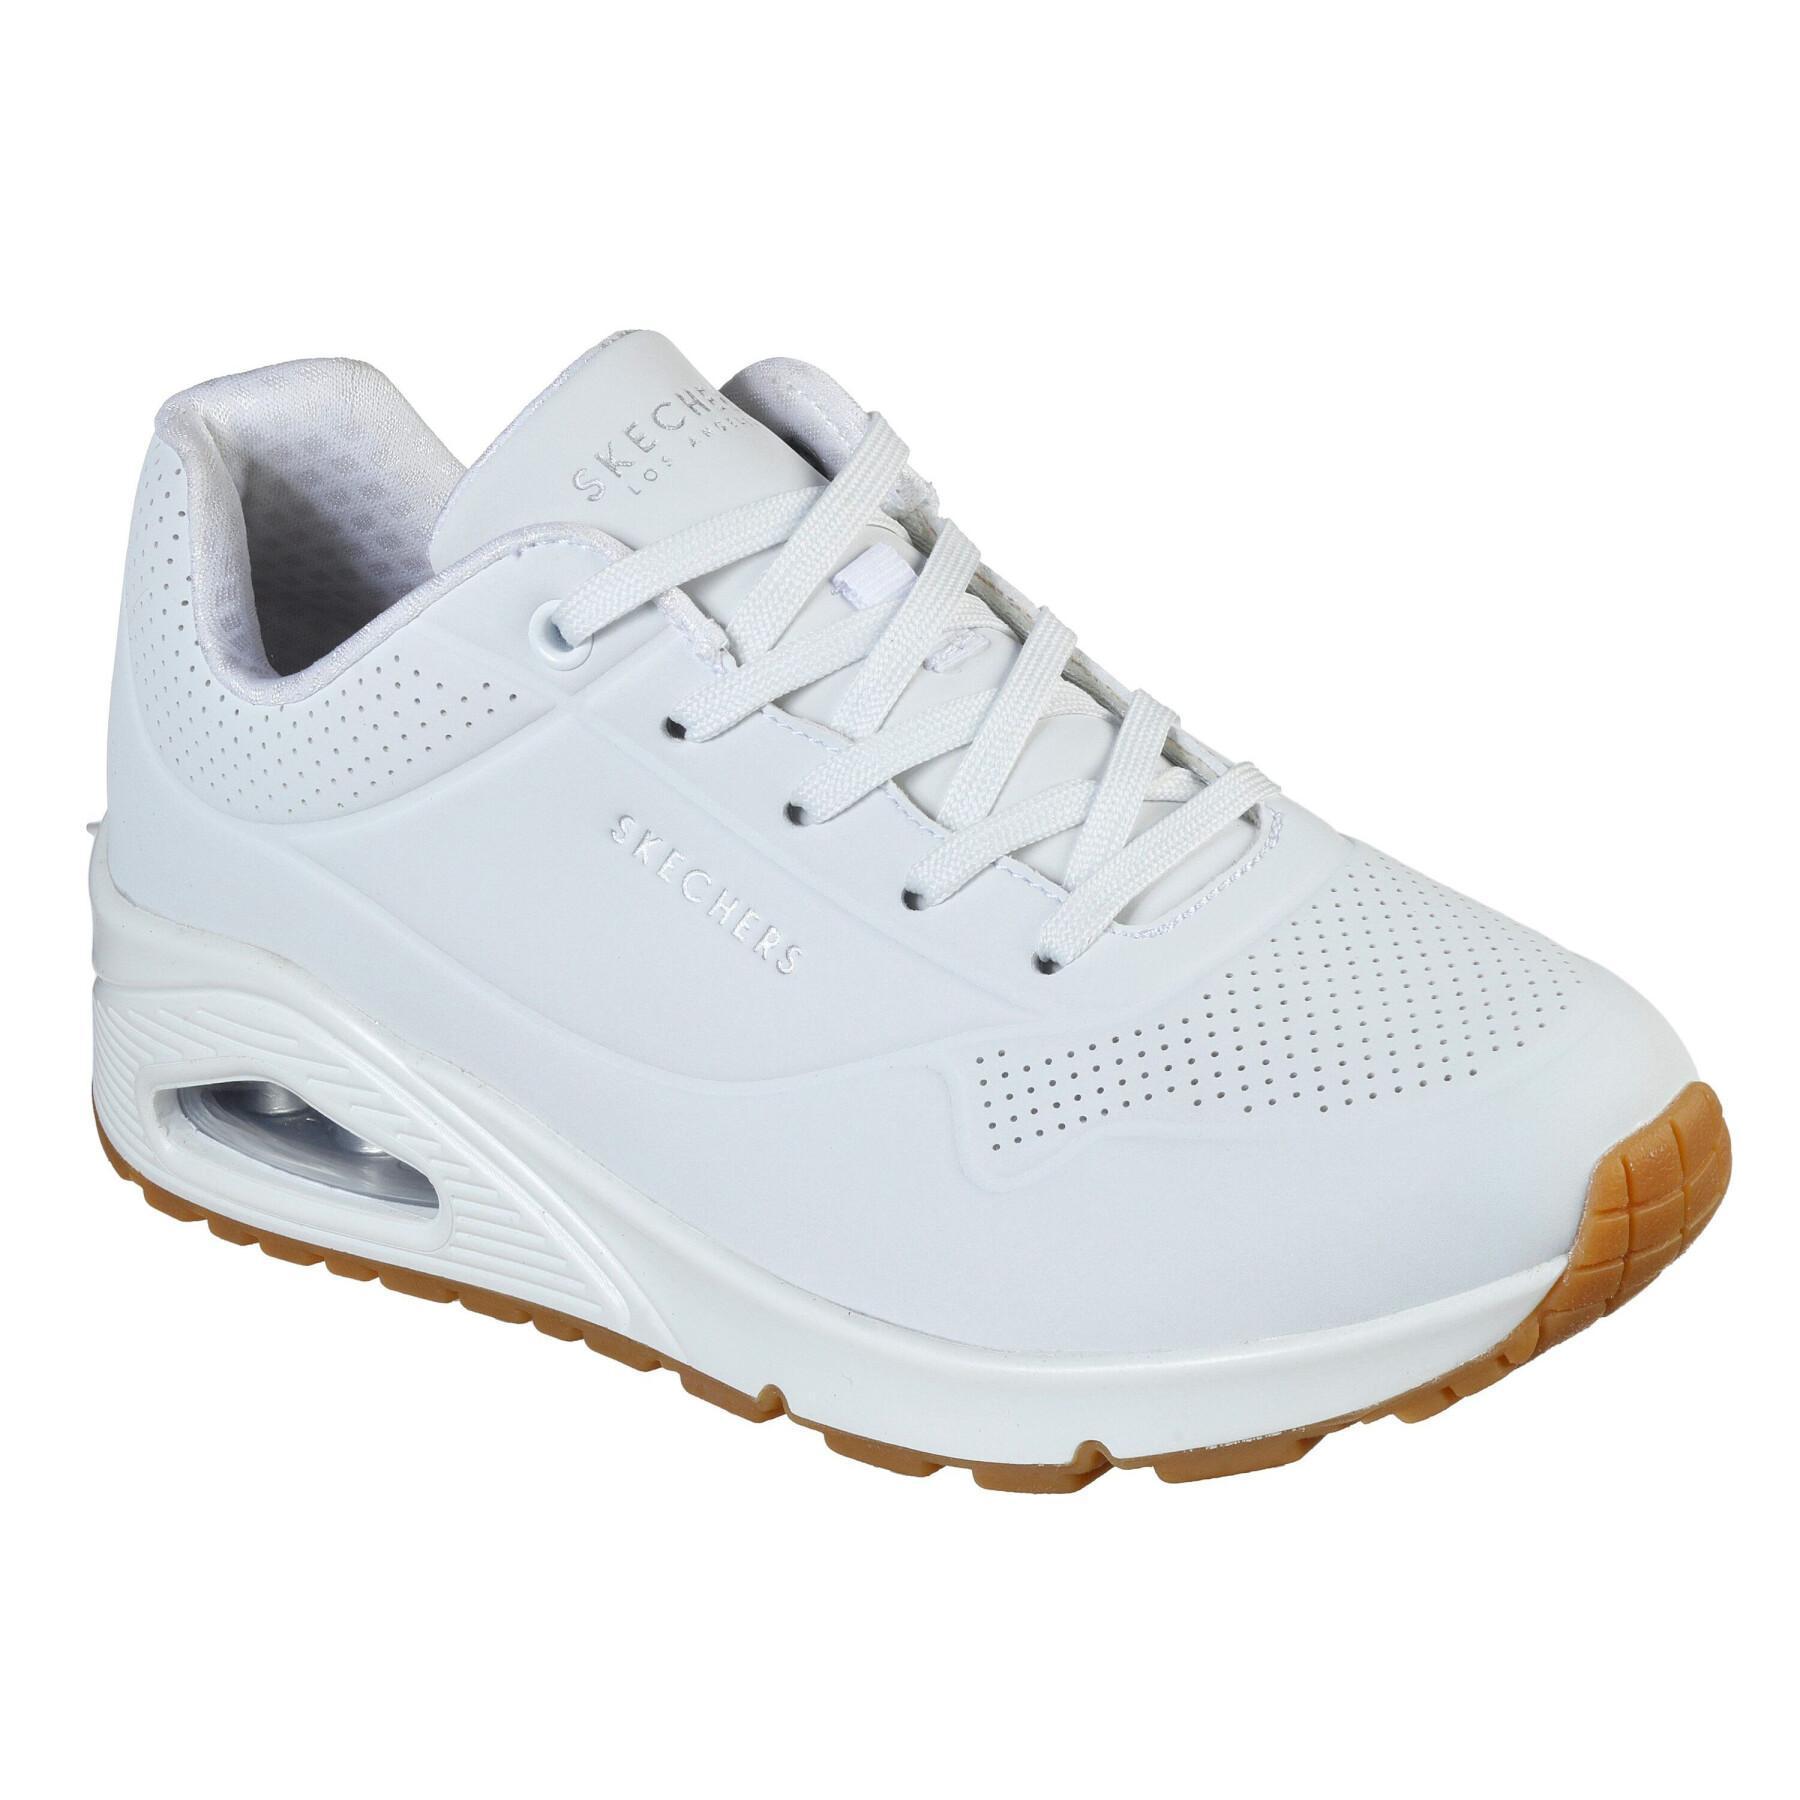 Women's sneakers Skechers Uno - Stand on air